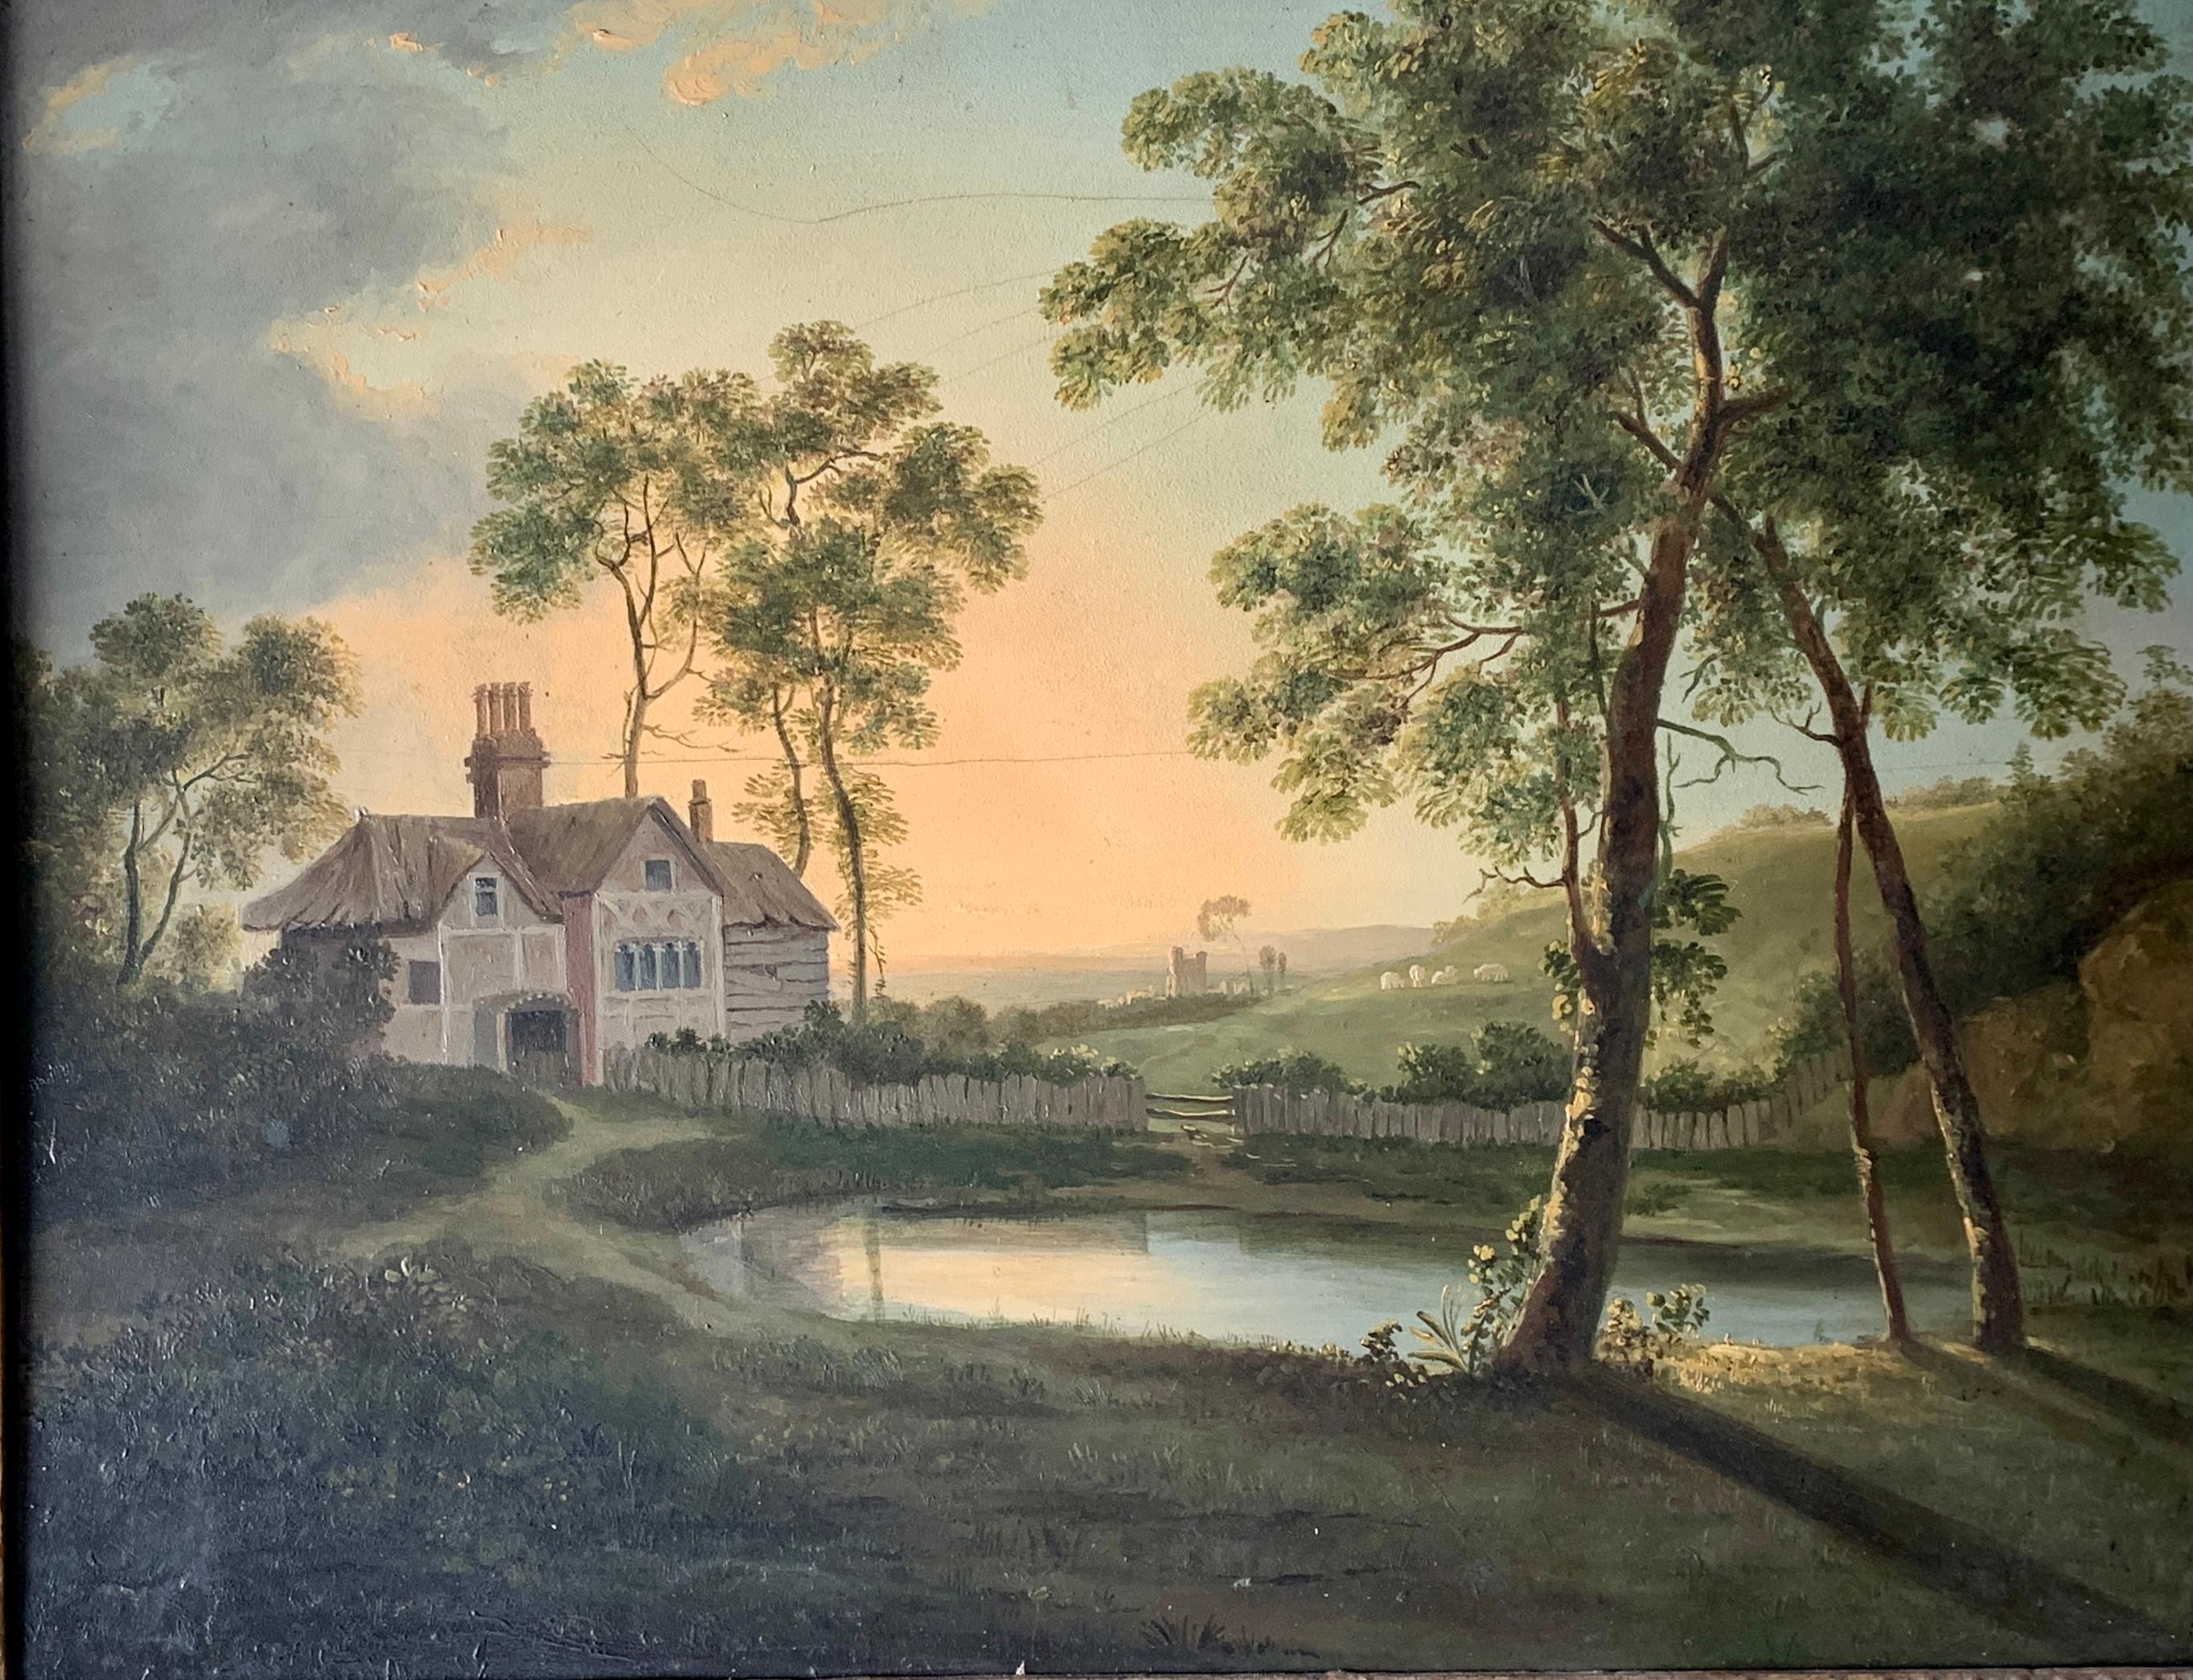 19th century English landscape with a cottage, pond, trees at sunrise or sunset - Painting by Unknown